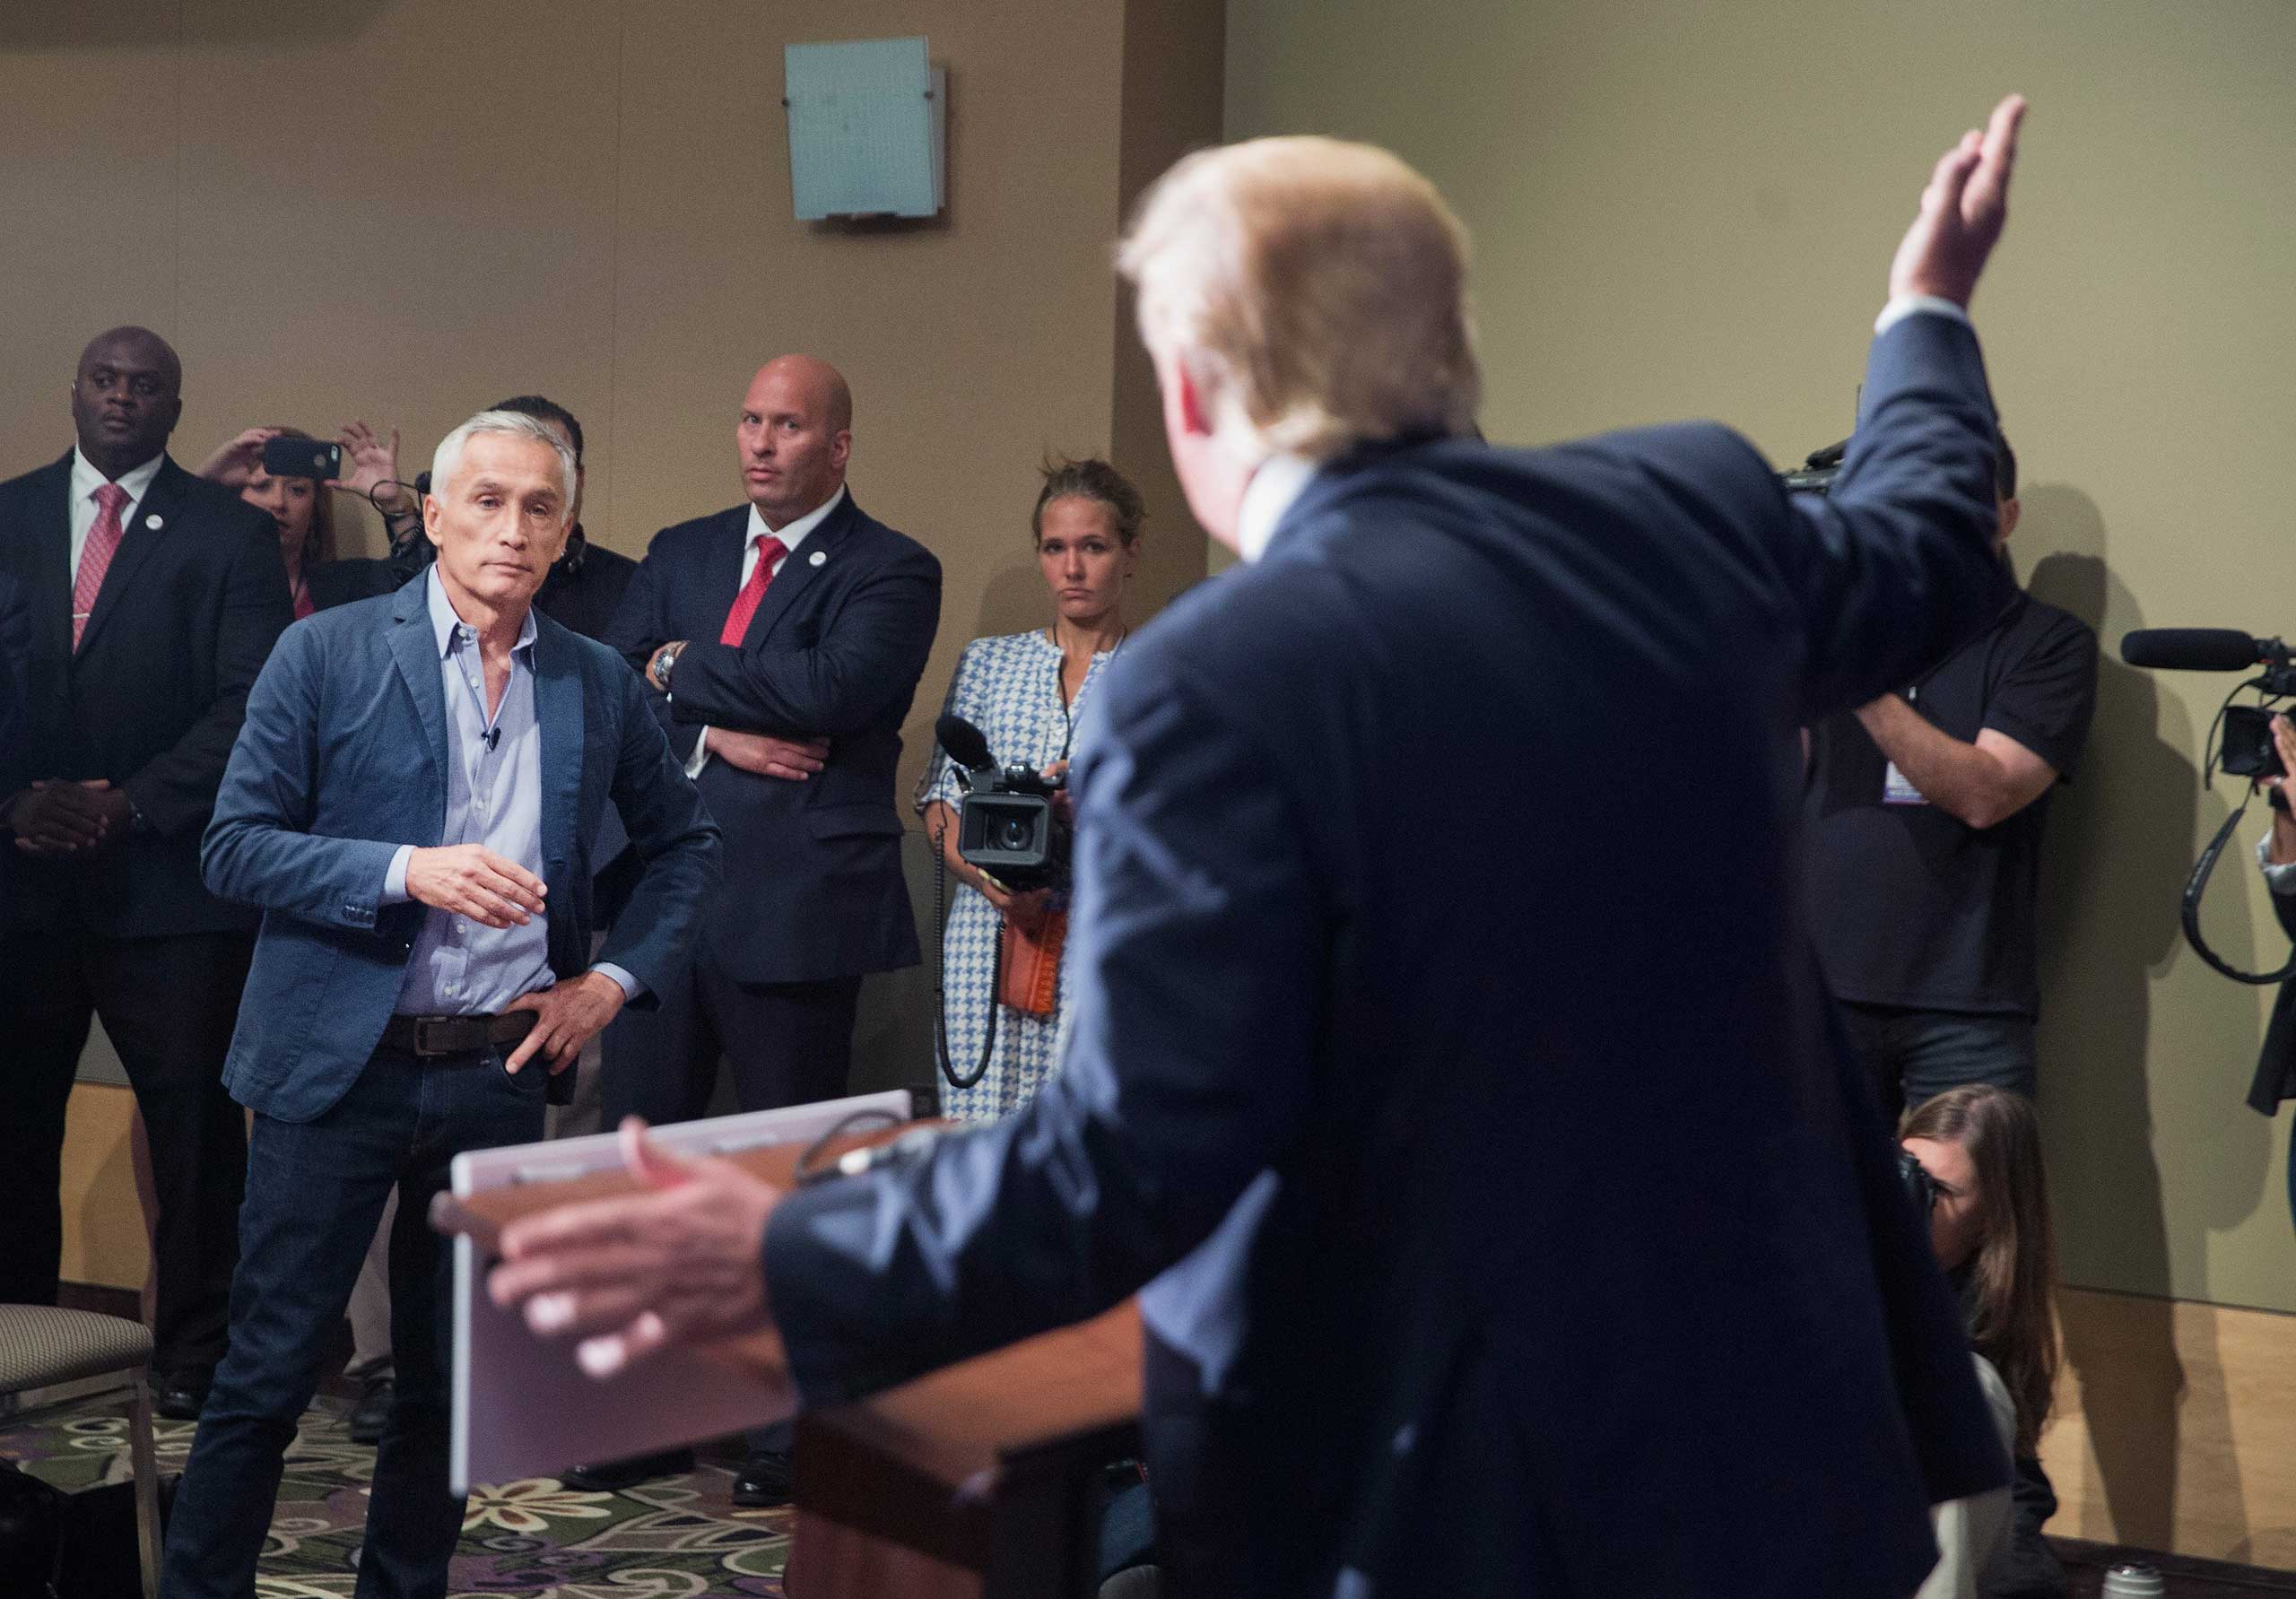 Republican presidential candidate Donald Trump fields a question from Univision and Fusion anchor Jorge Ramos during a press conference held before his campaign event at the Grand River Center in Dubuque, Iowa, on Aug. 25, 2015. (Scott Olson—Getty Images)